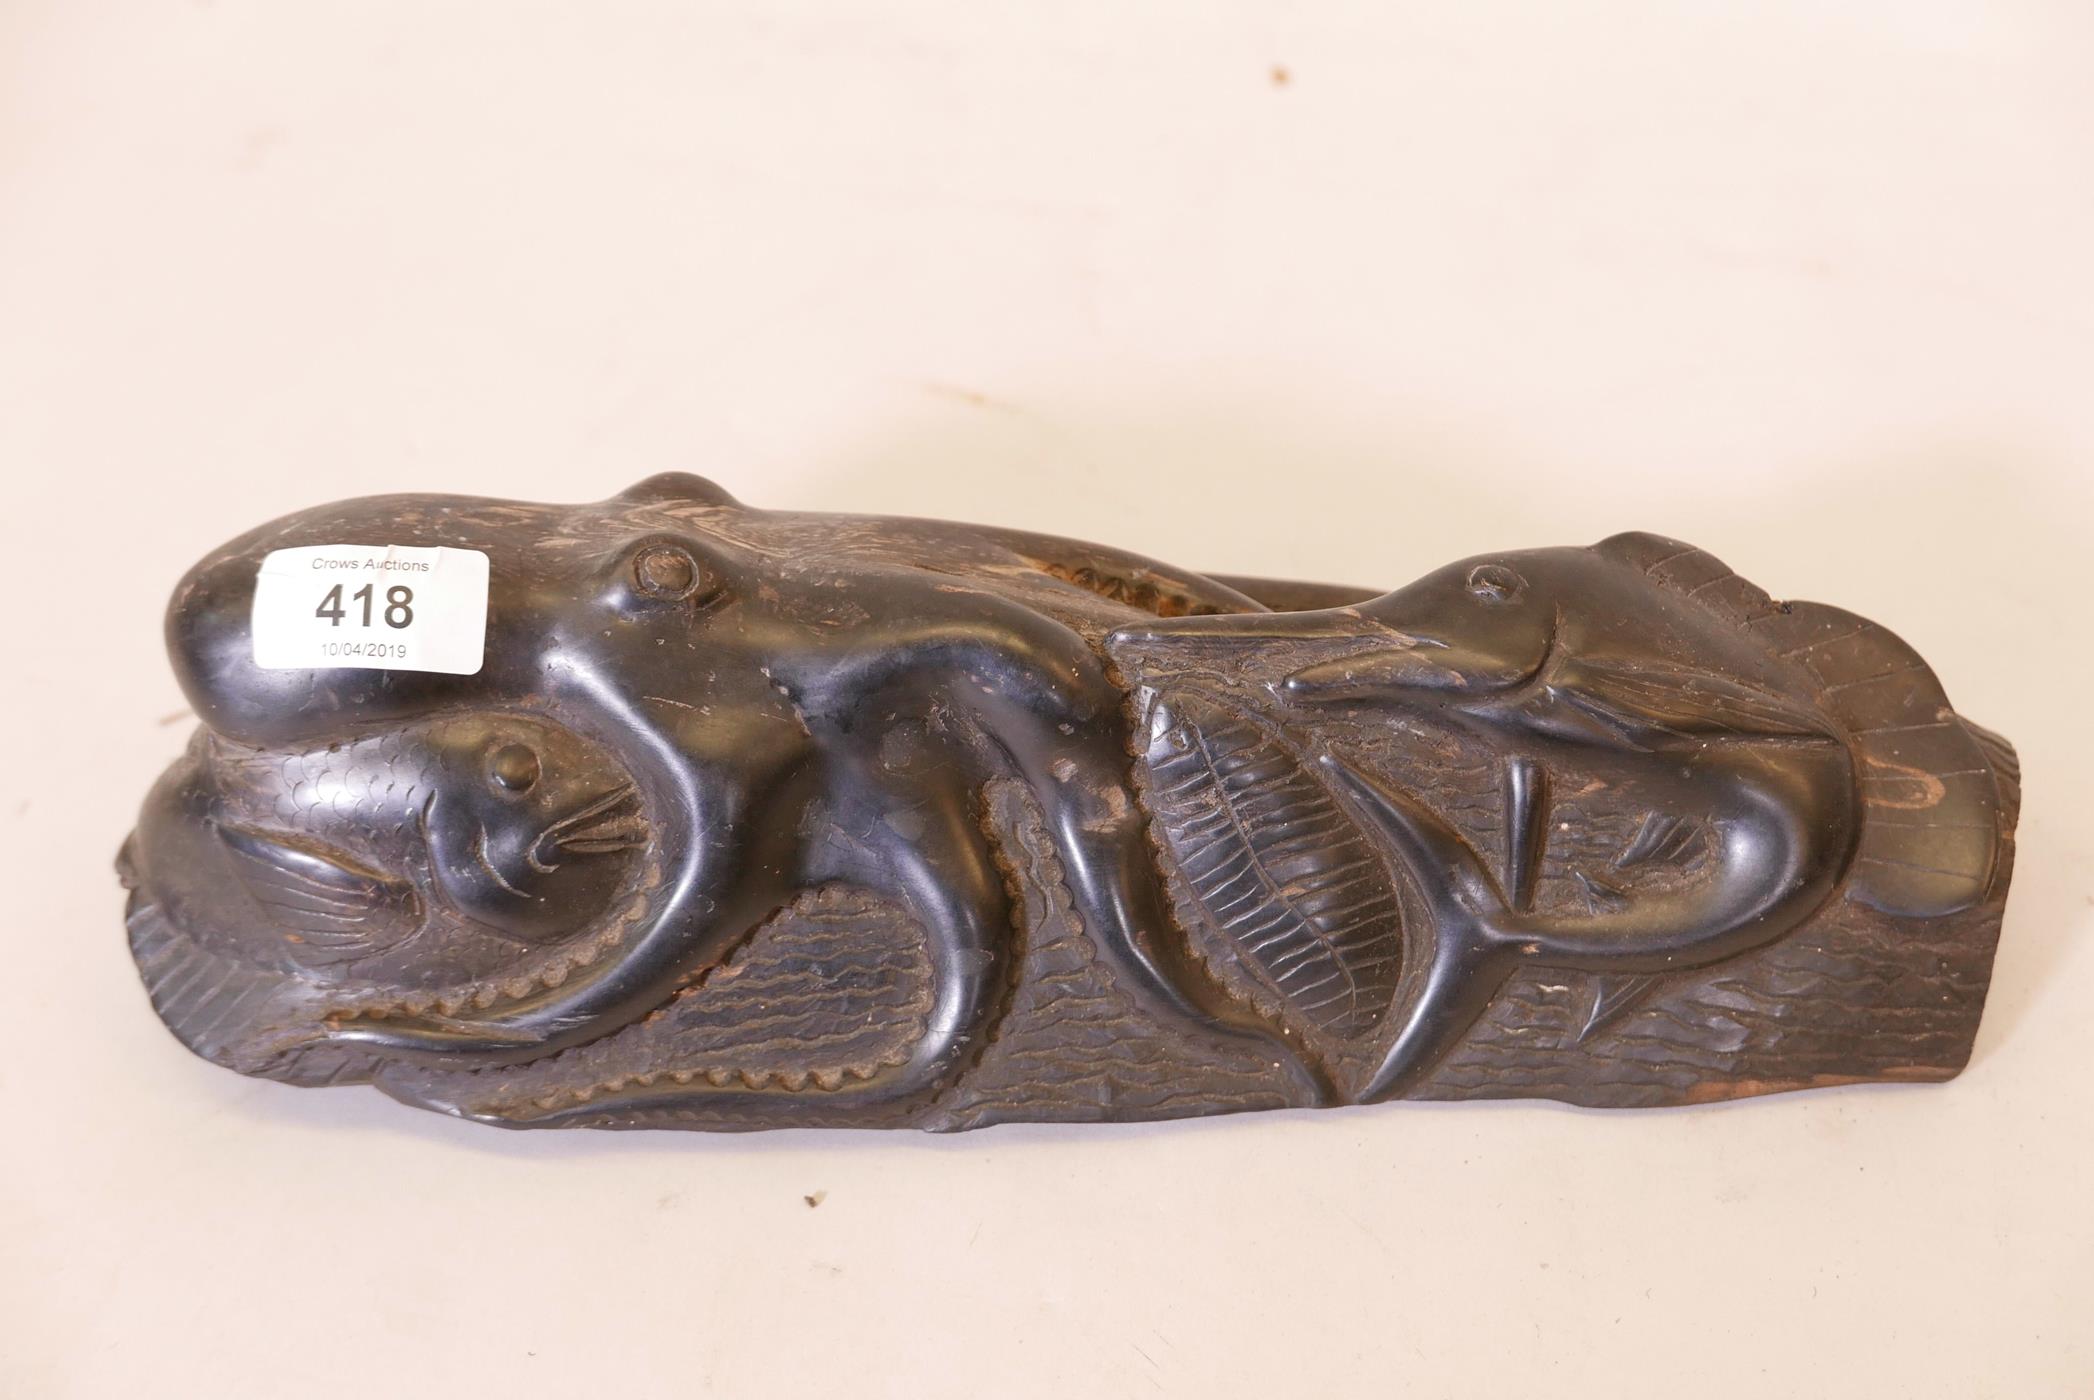 An ebony wood carving of an octopus and swordfish, 13" long - Image 2 of 3